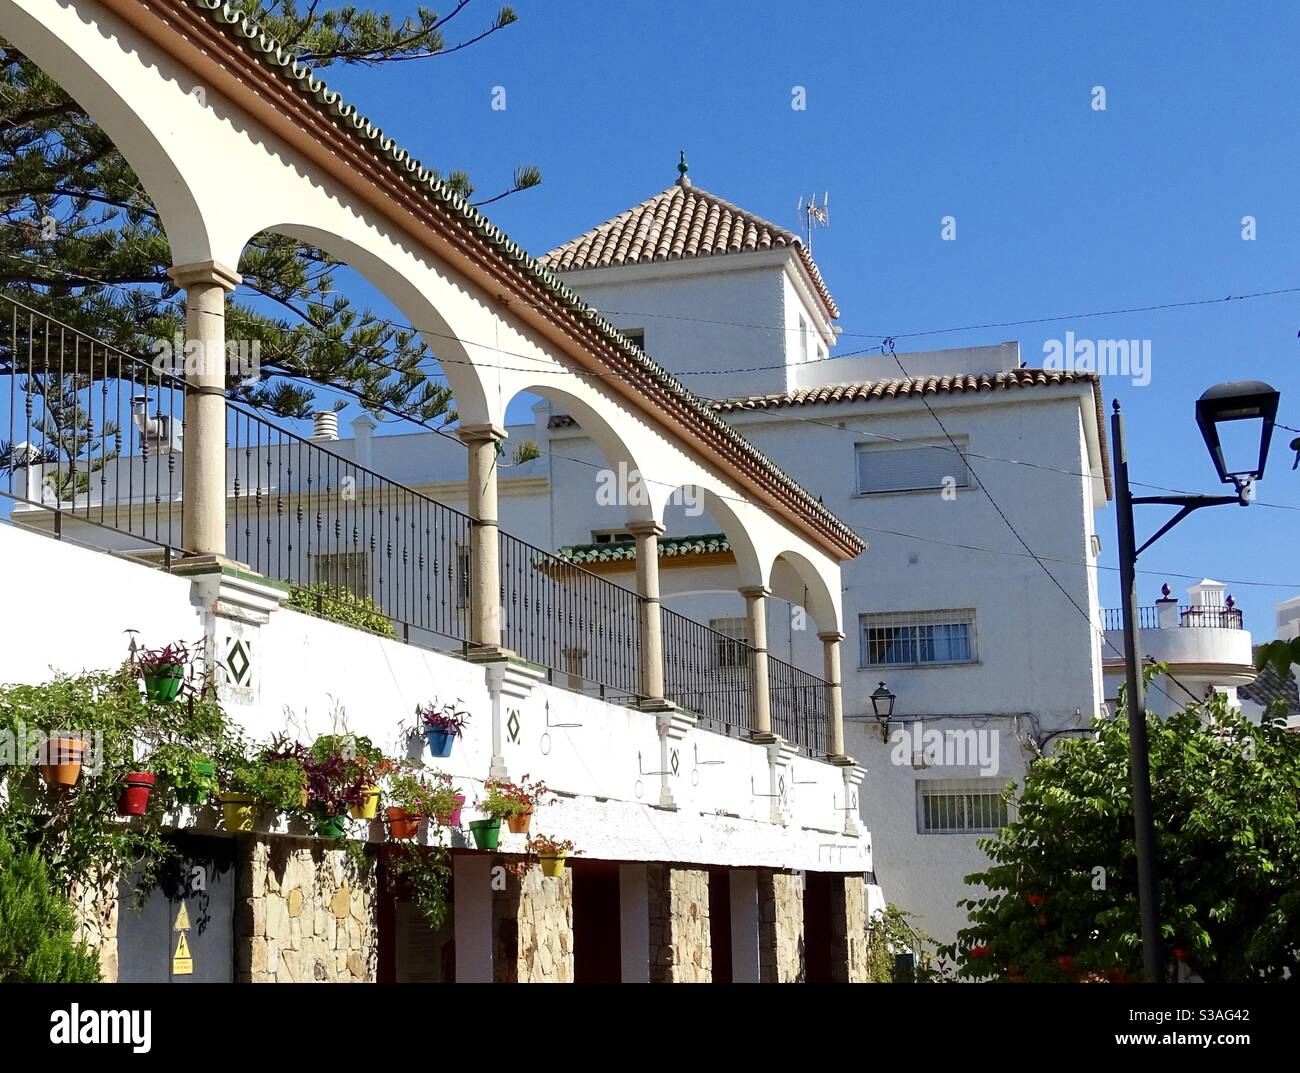 Flower displays outside building with arches in Estepona in southern Spain Stock Photo